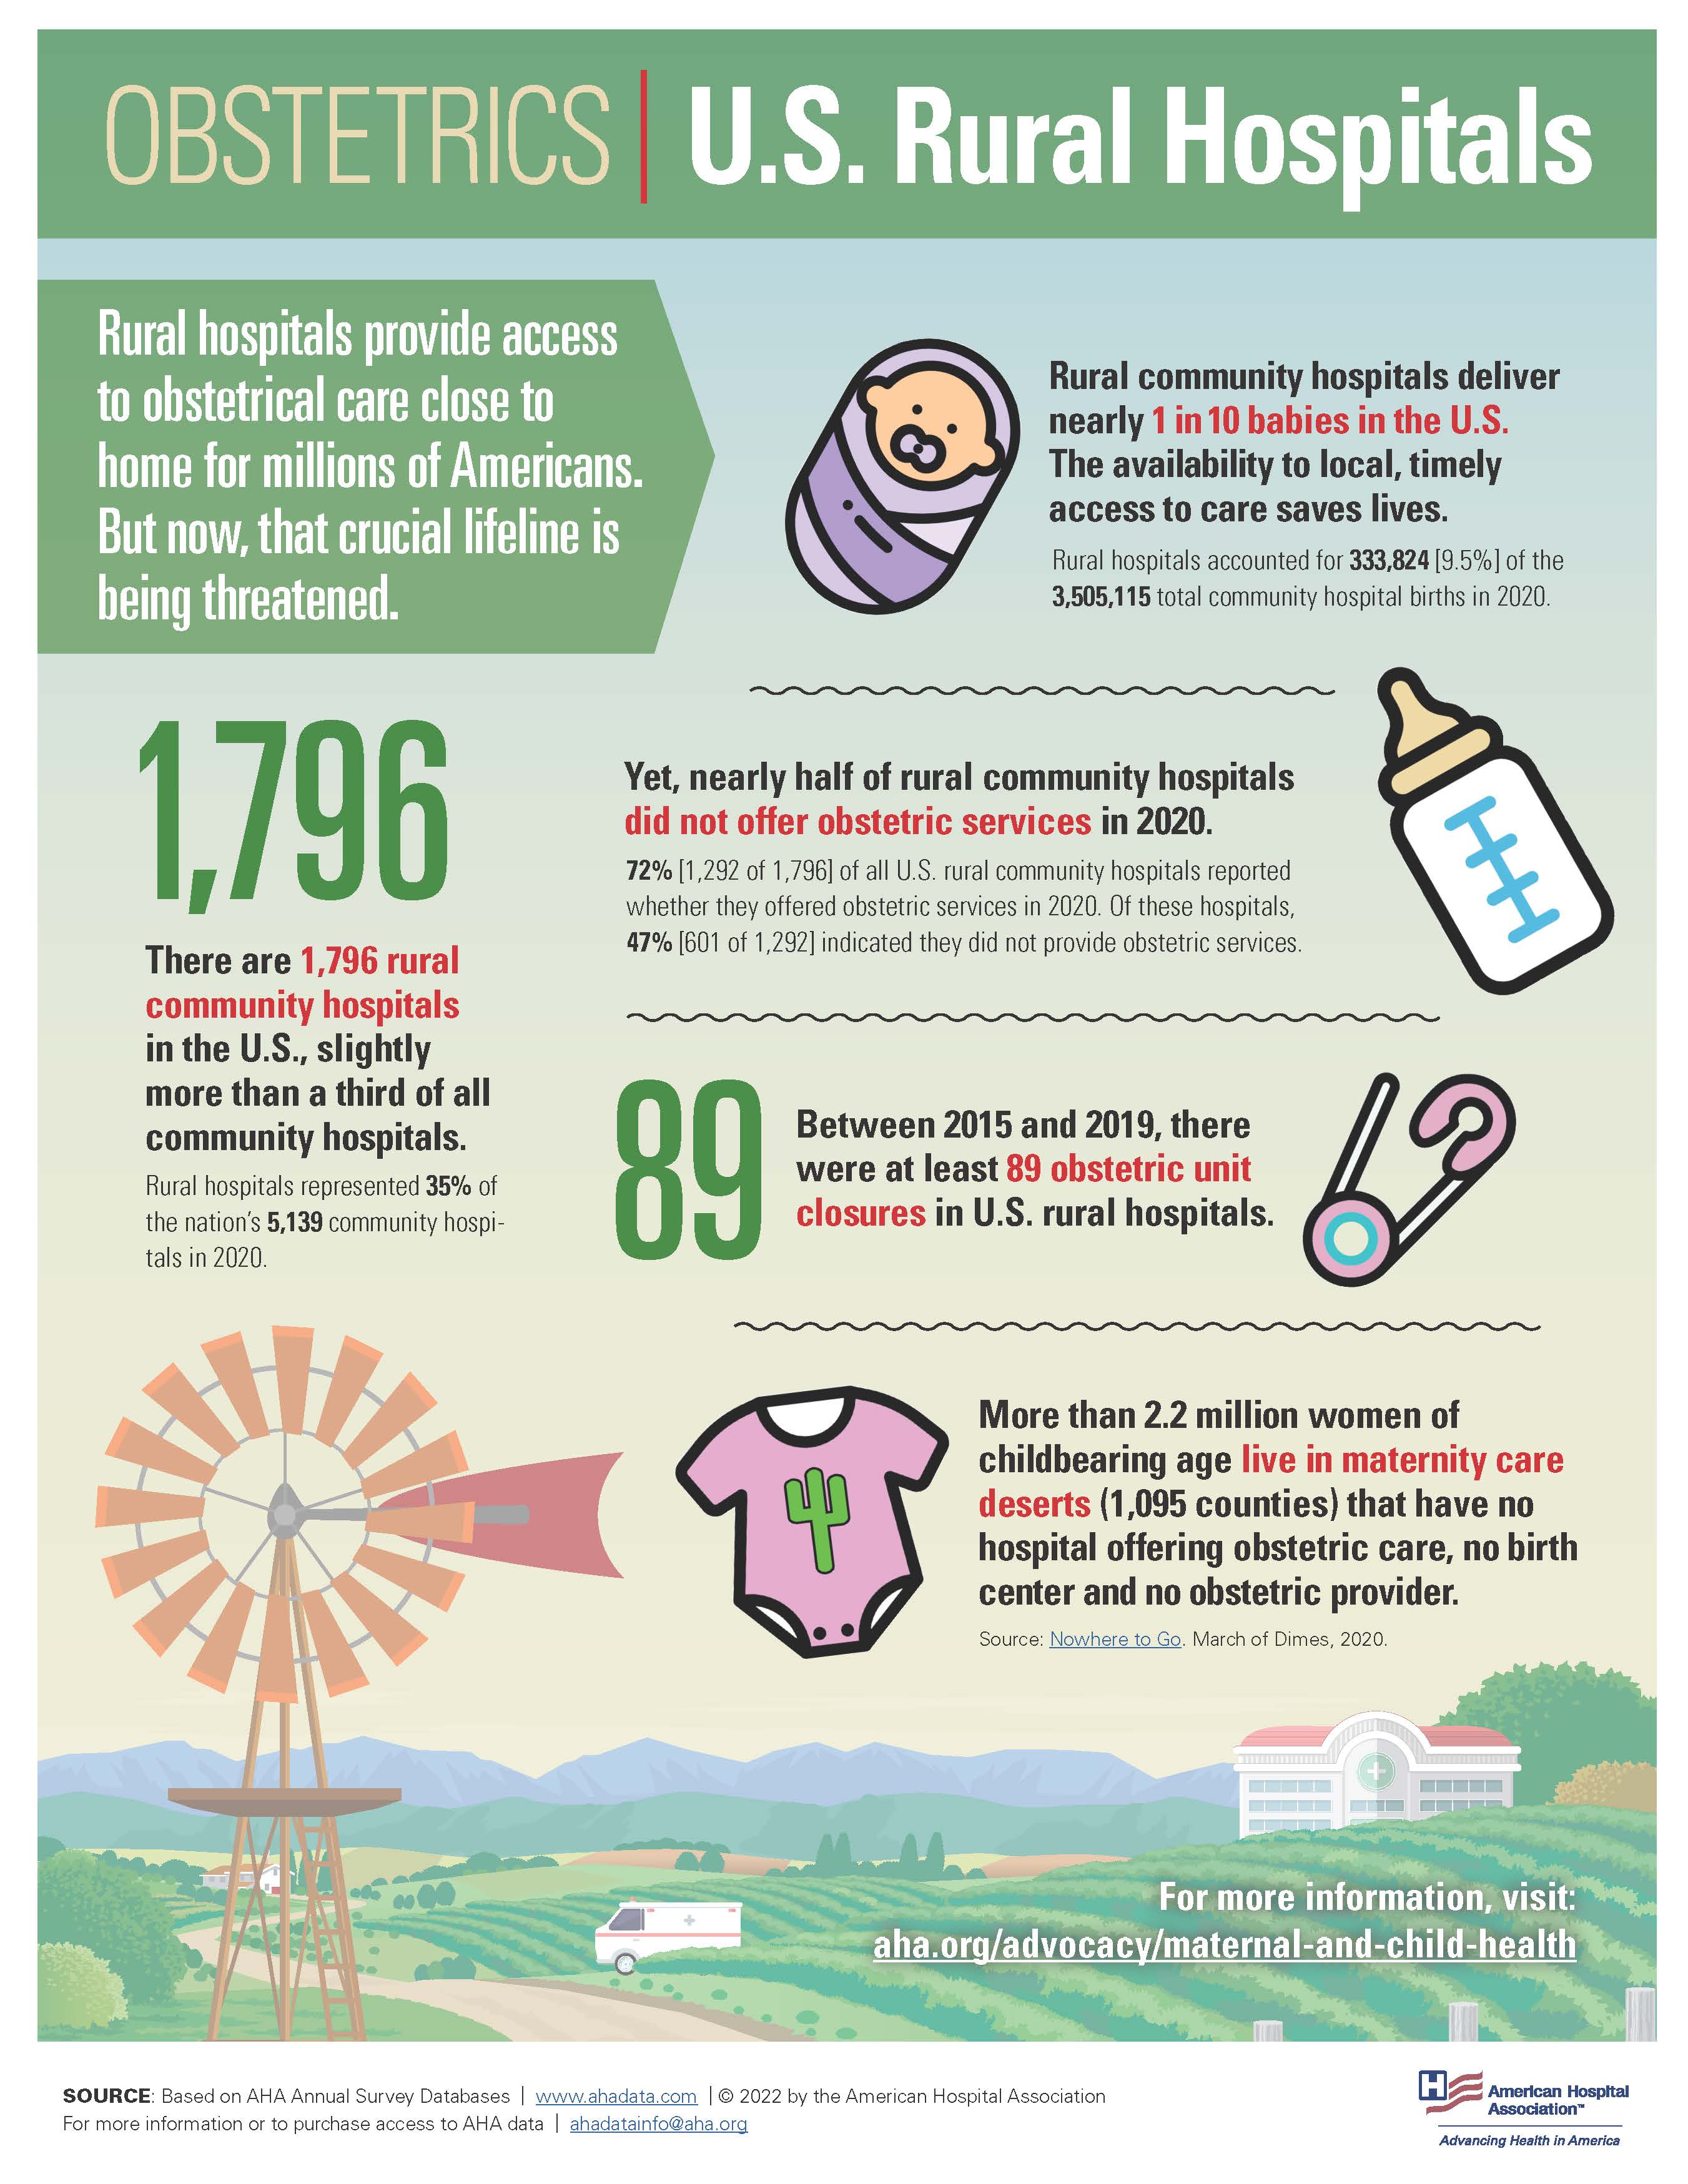 Obstetrics: U.S. Rural Hospitals Infographic. Rural hospitals provide access to obstetrical care close to home for millions of Americans. But now, that crucial lifeline is being threatened.